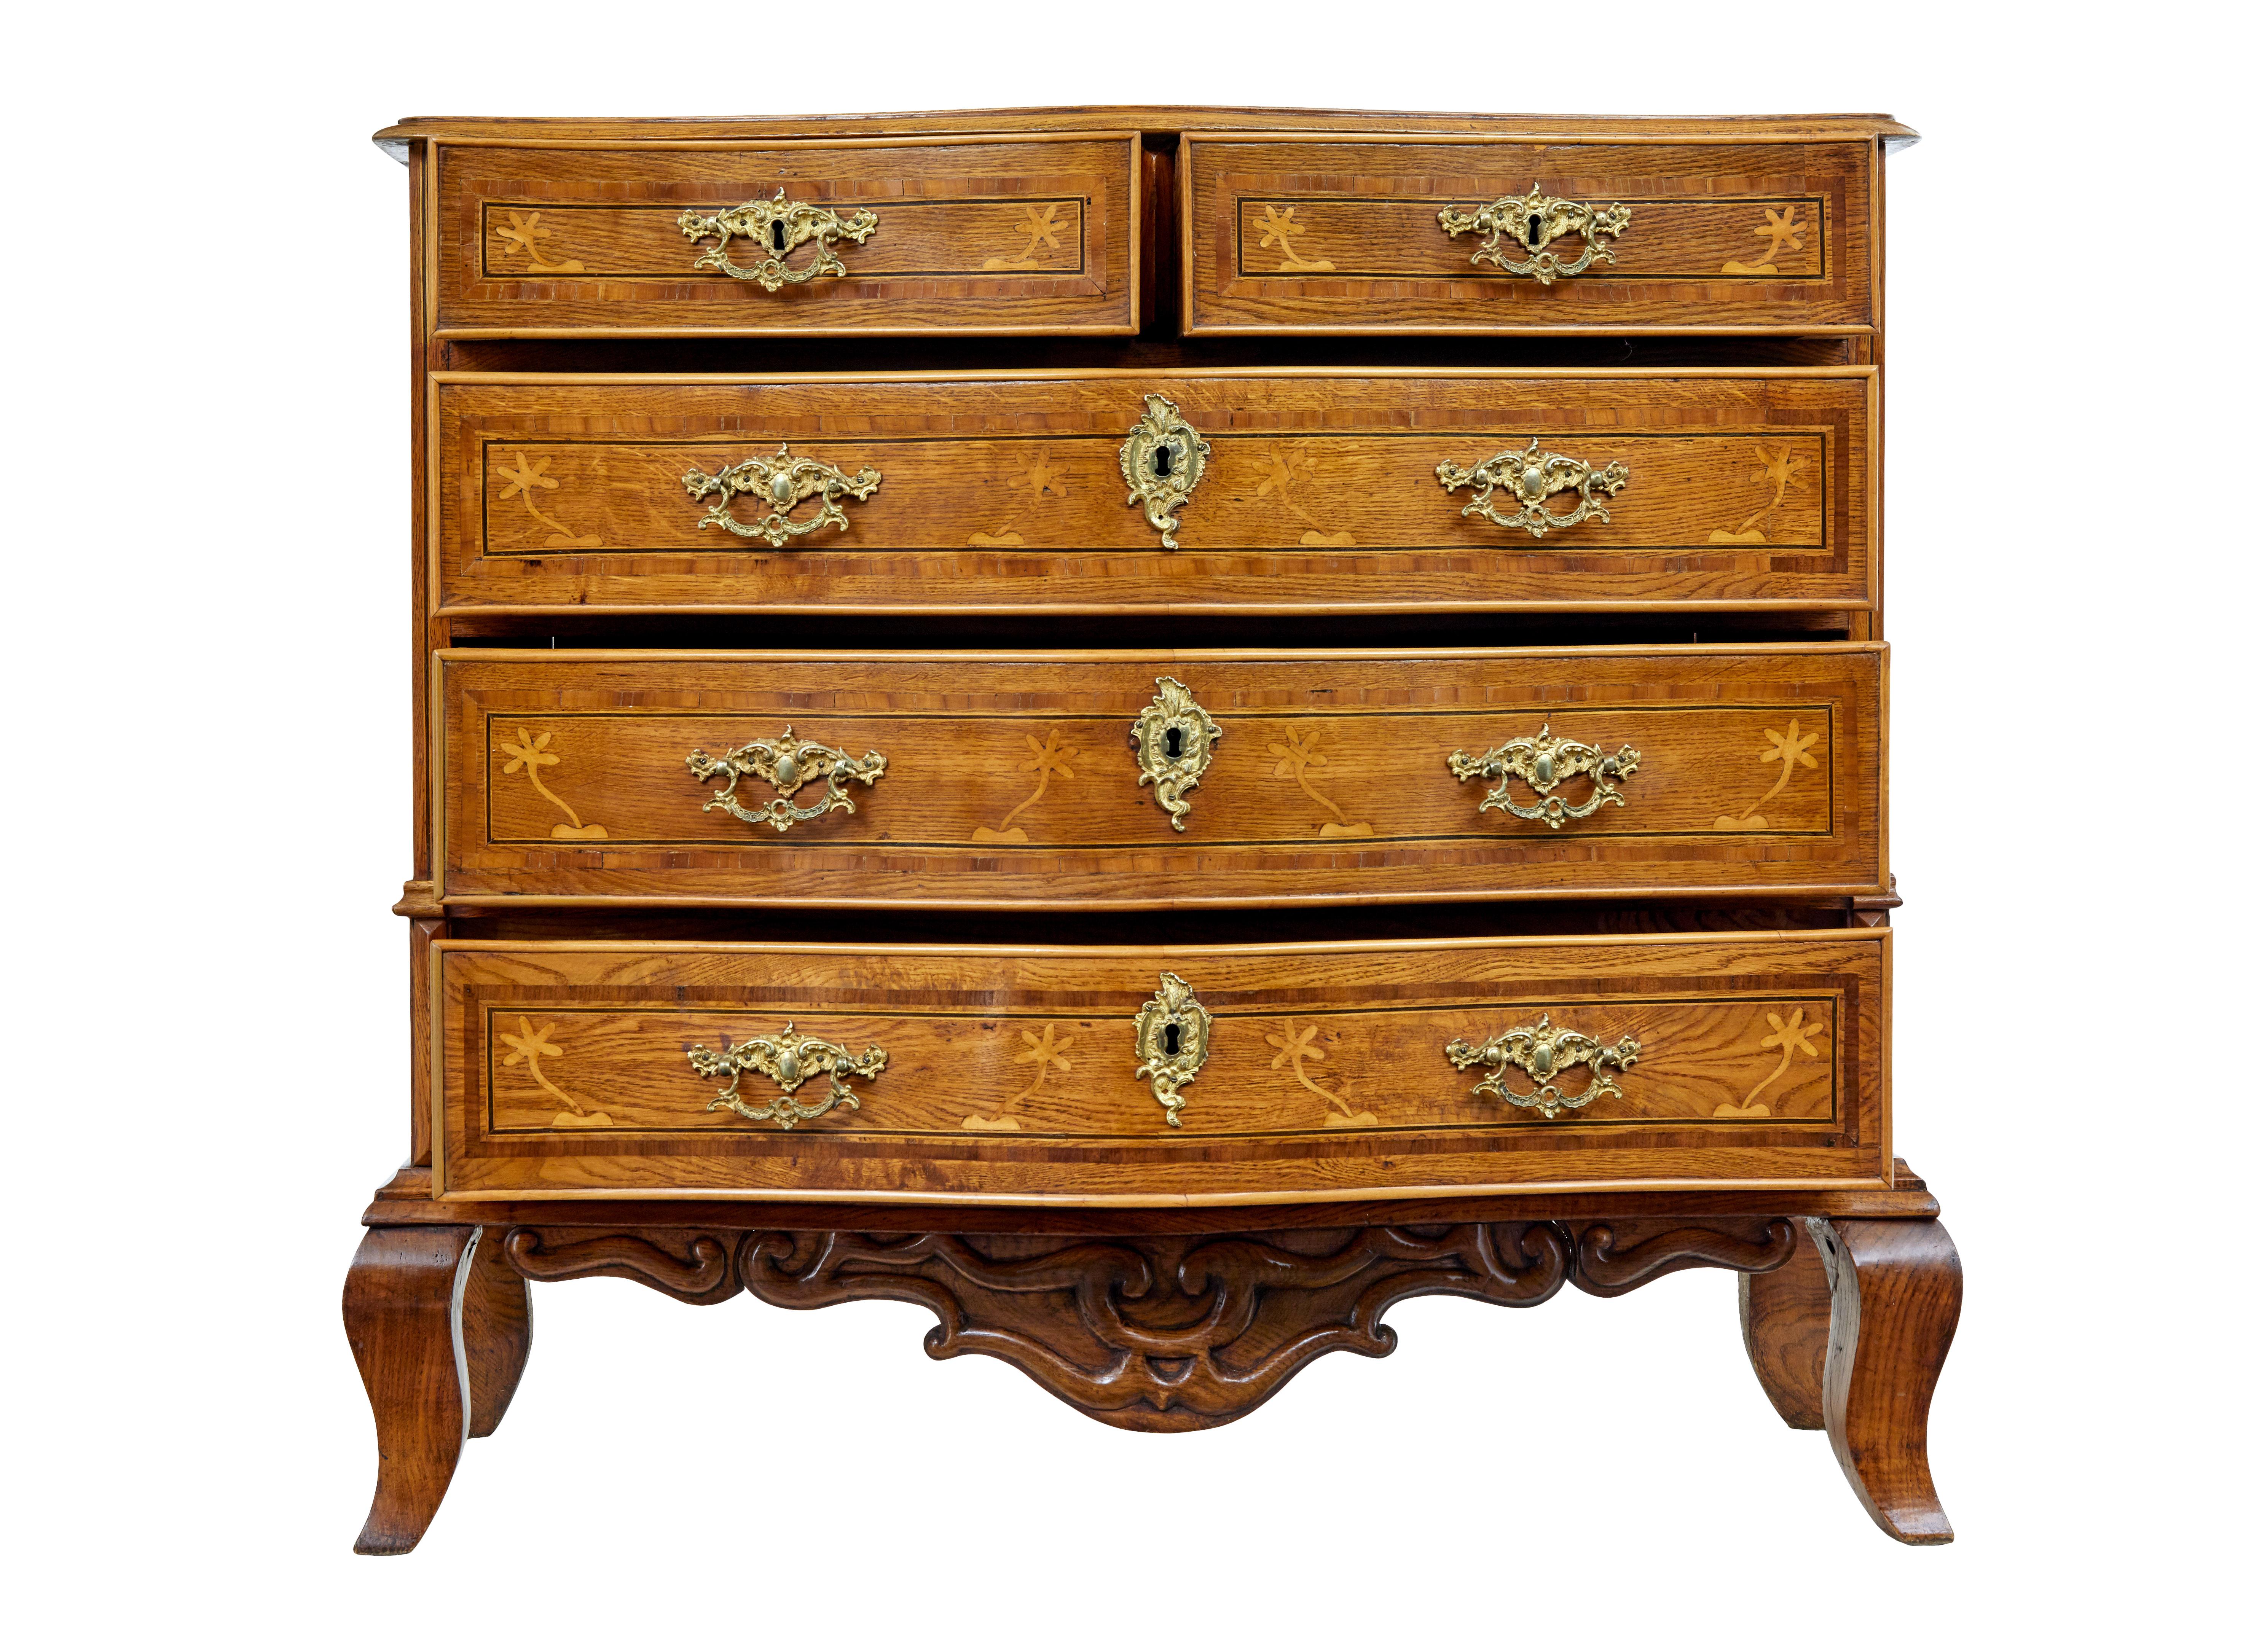 Baroque Early 19th Century Swedish Oak Inlaid Chest of Drawers For Sale